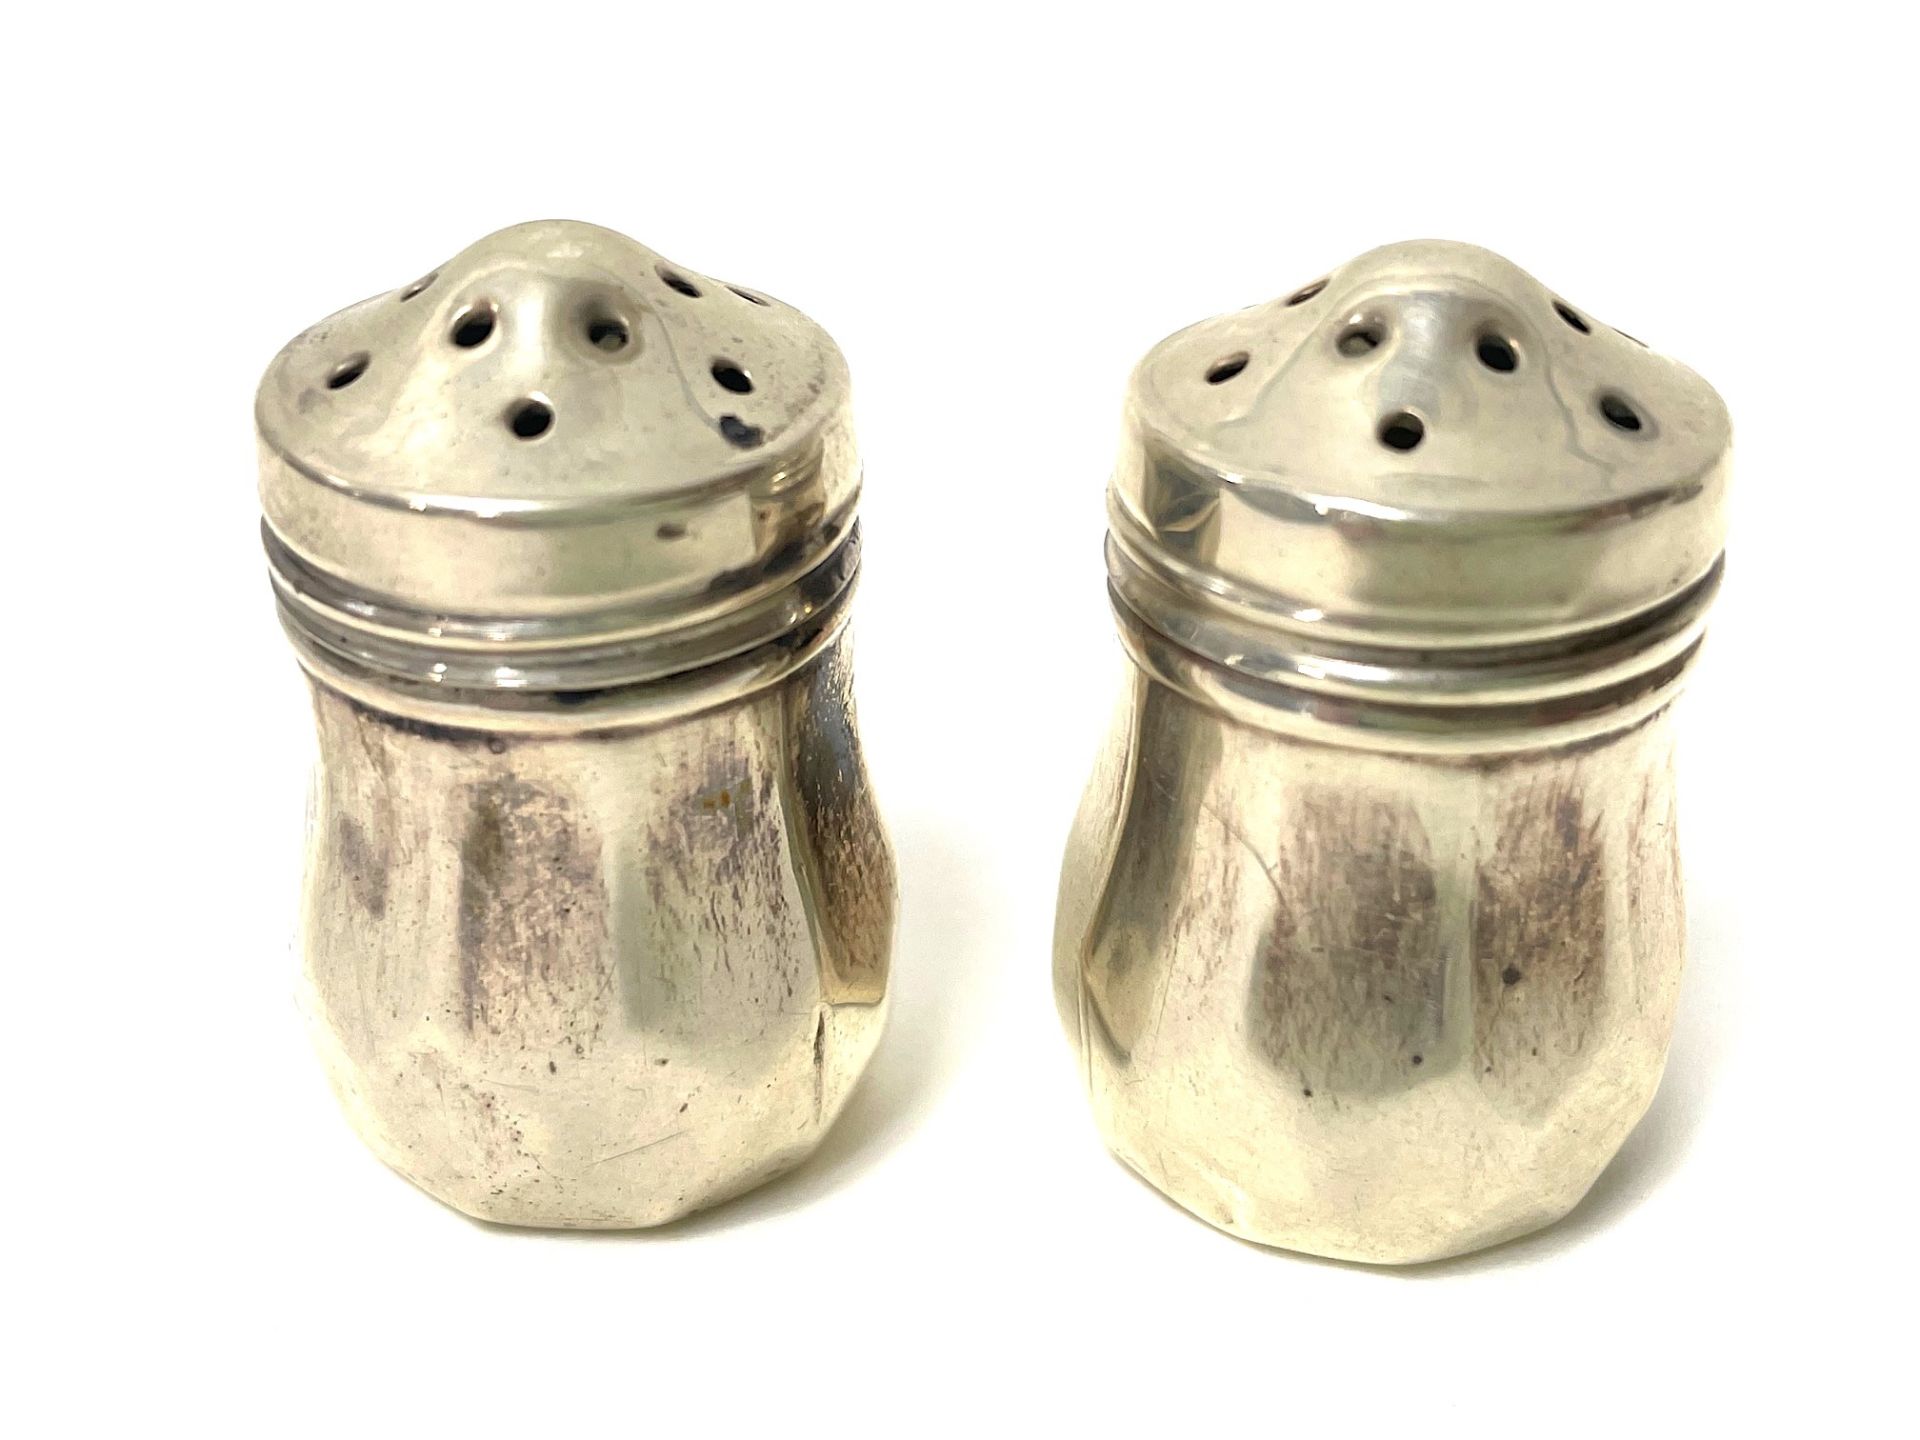 40 pairs of salt/pepper and spice shakers, - Image 19 of 88